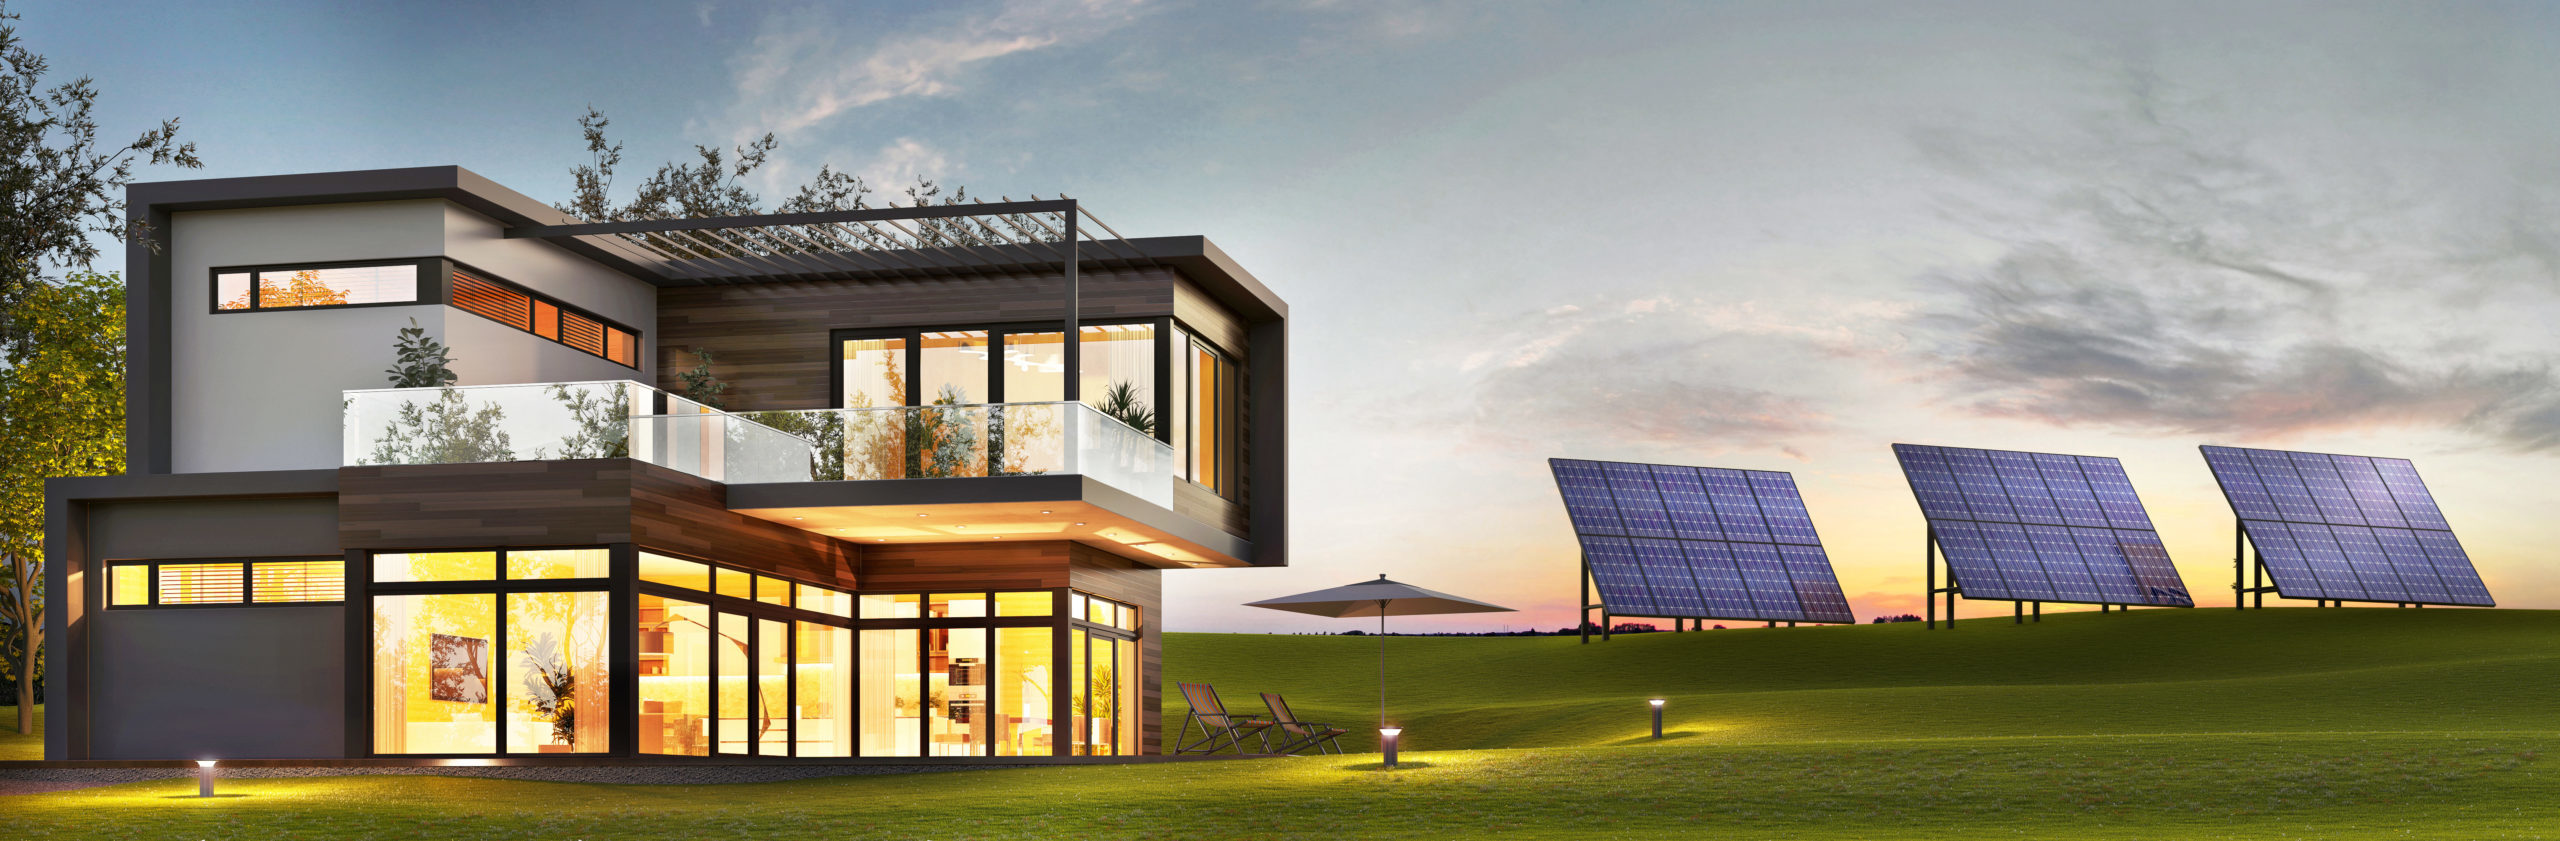 Evening view of a luxurious modern house with solar panels